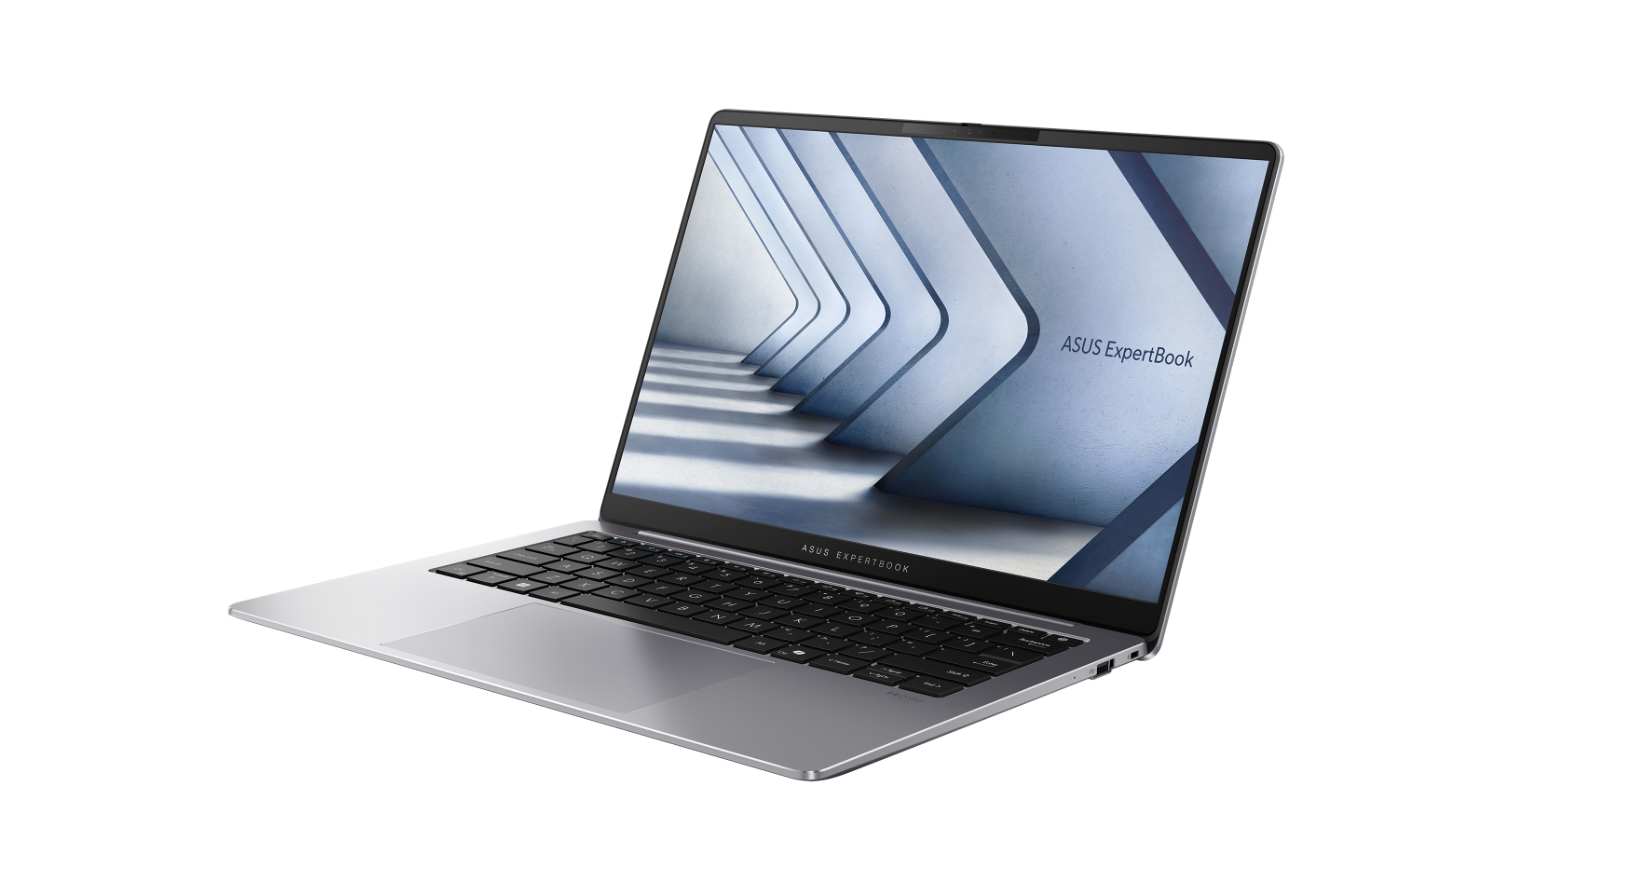 A rendering of the Asus ExpertBook P5 on a white background.